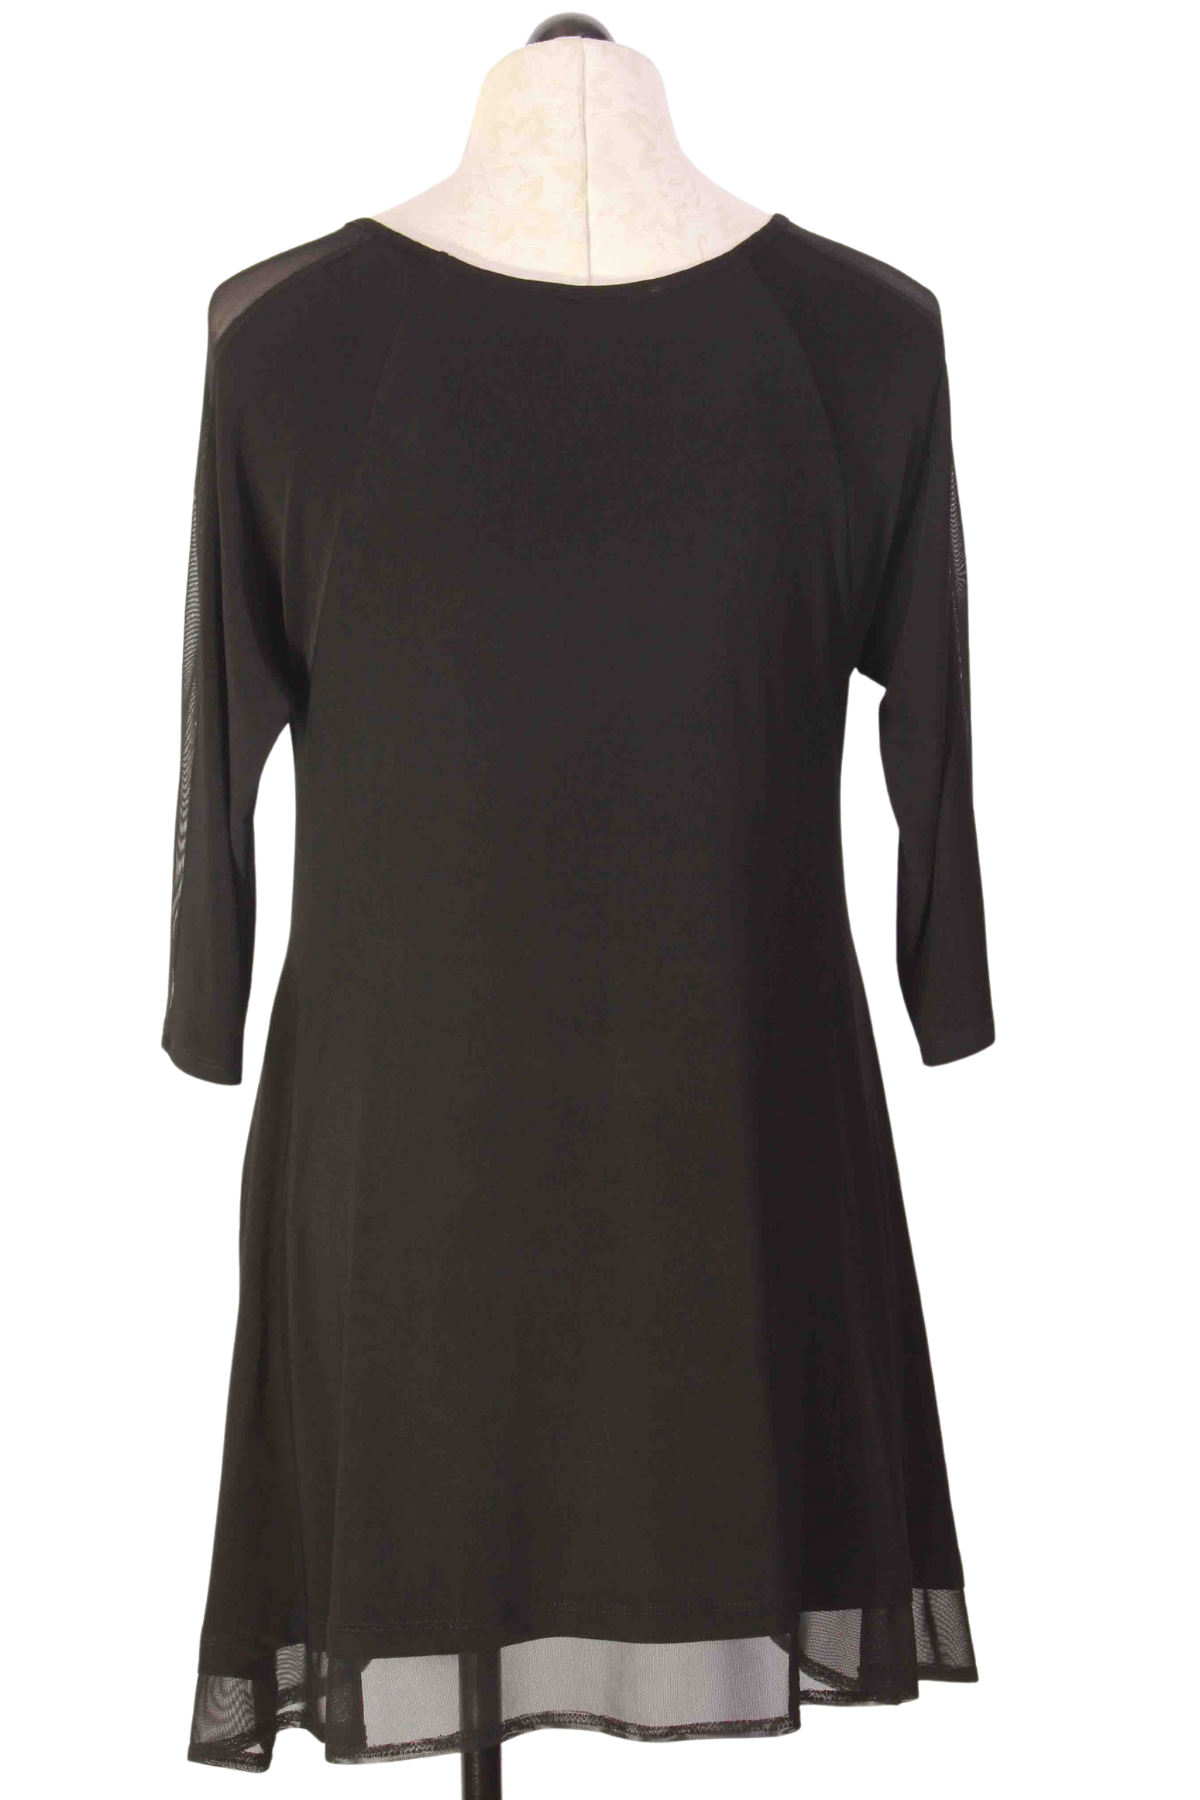 back view of black Mesh Trimmed Tunic by Reina Lee